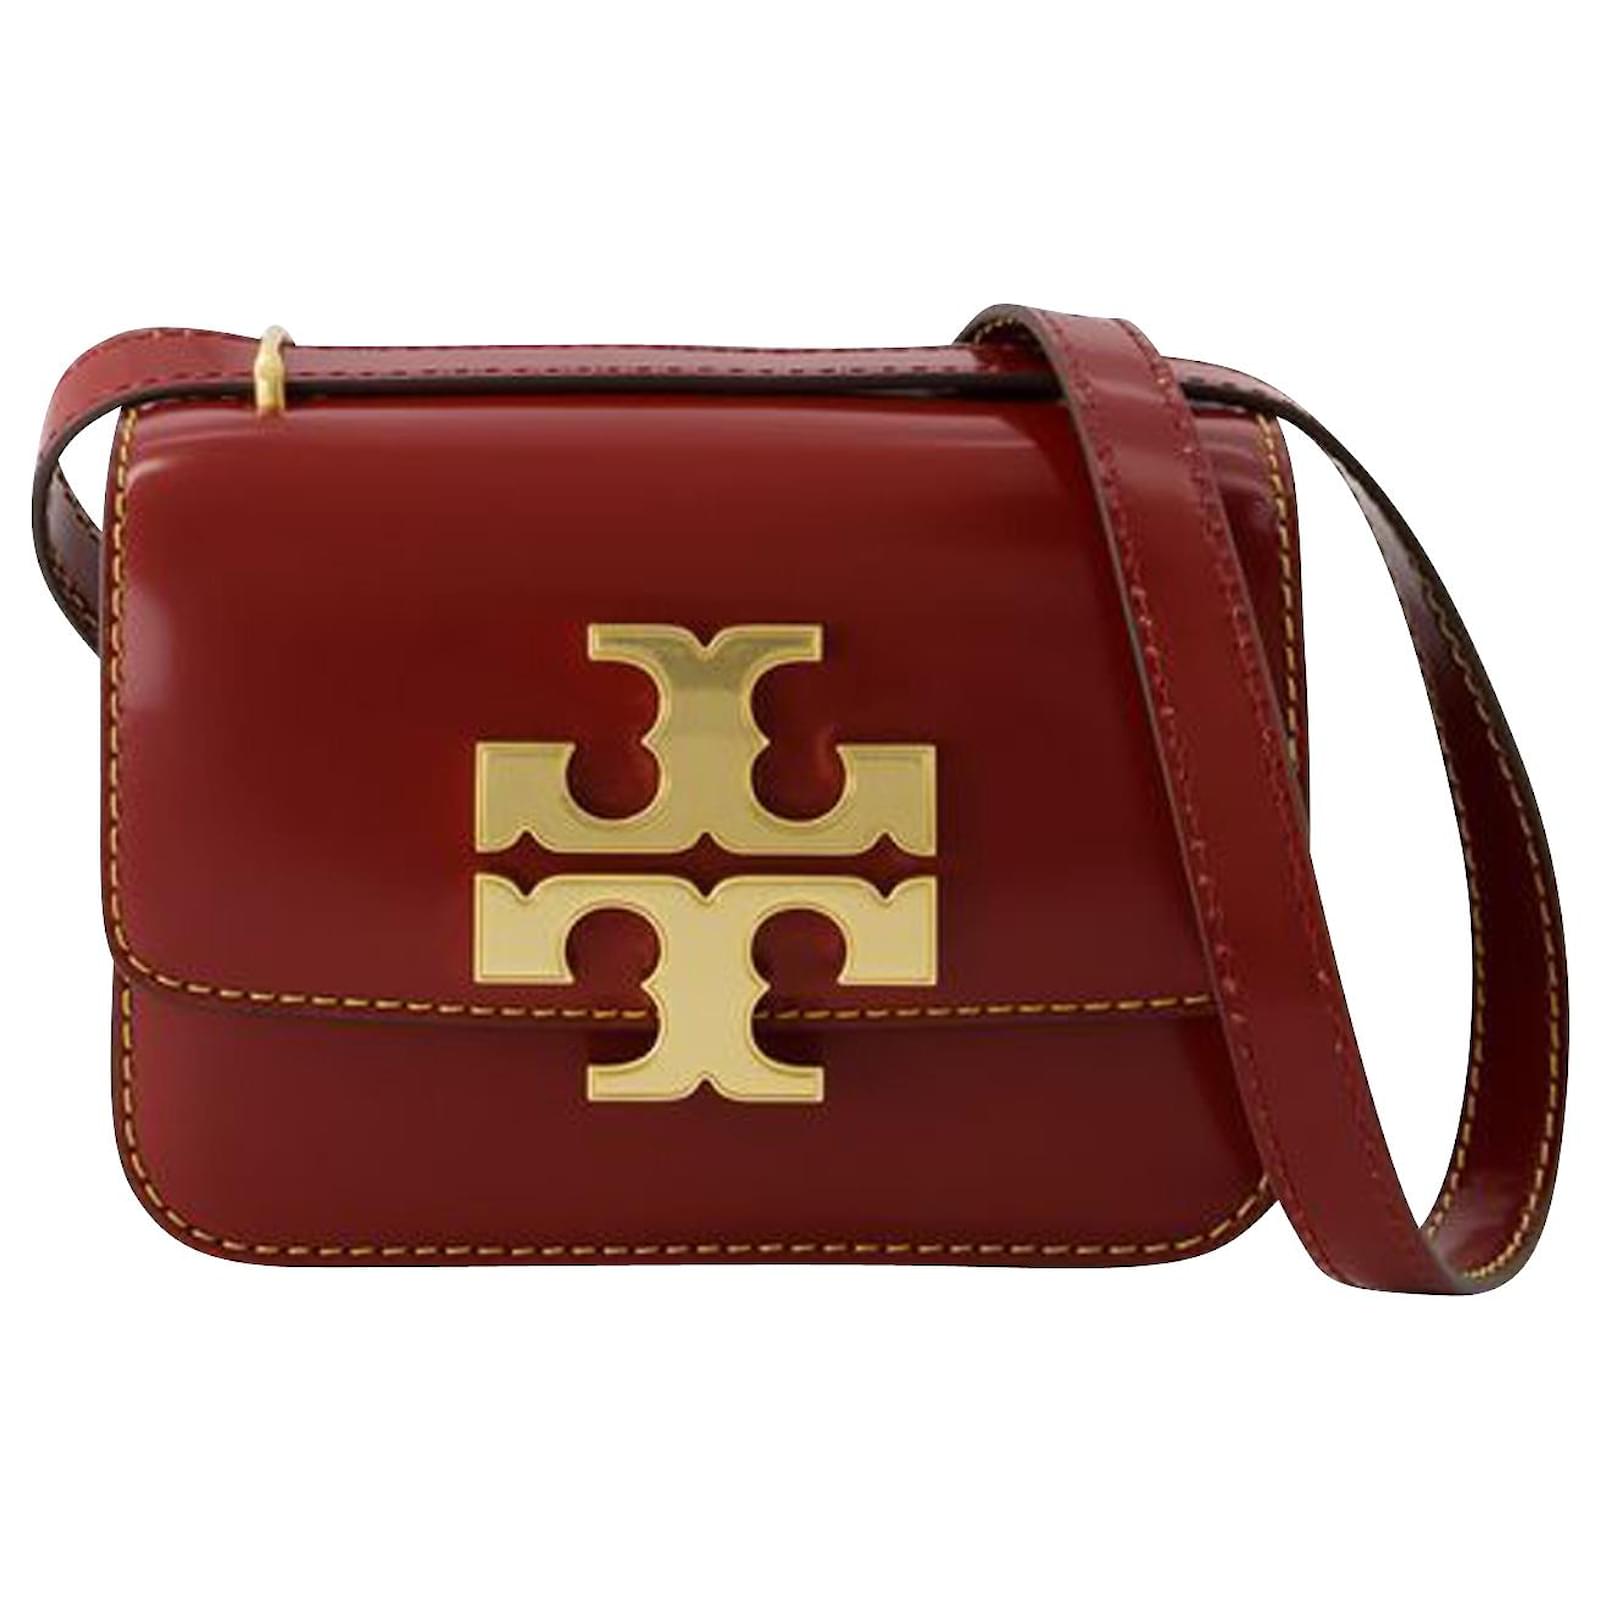 Eleanor Small Convertible Bag - Tory Burch - Leather - Red Pony